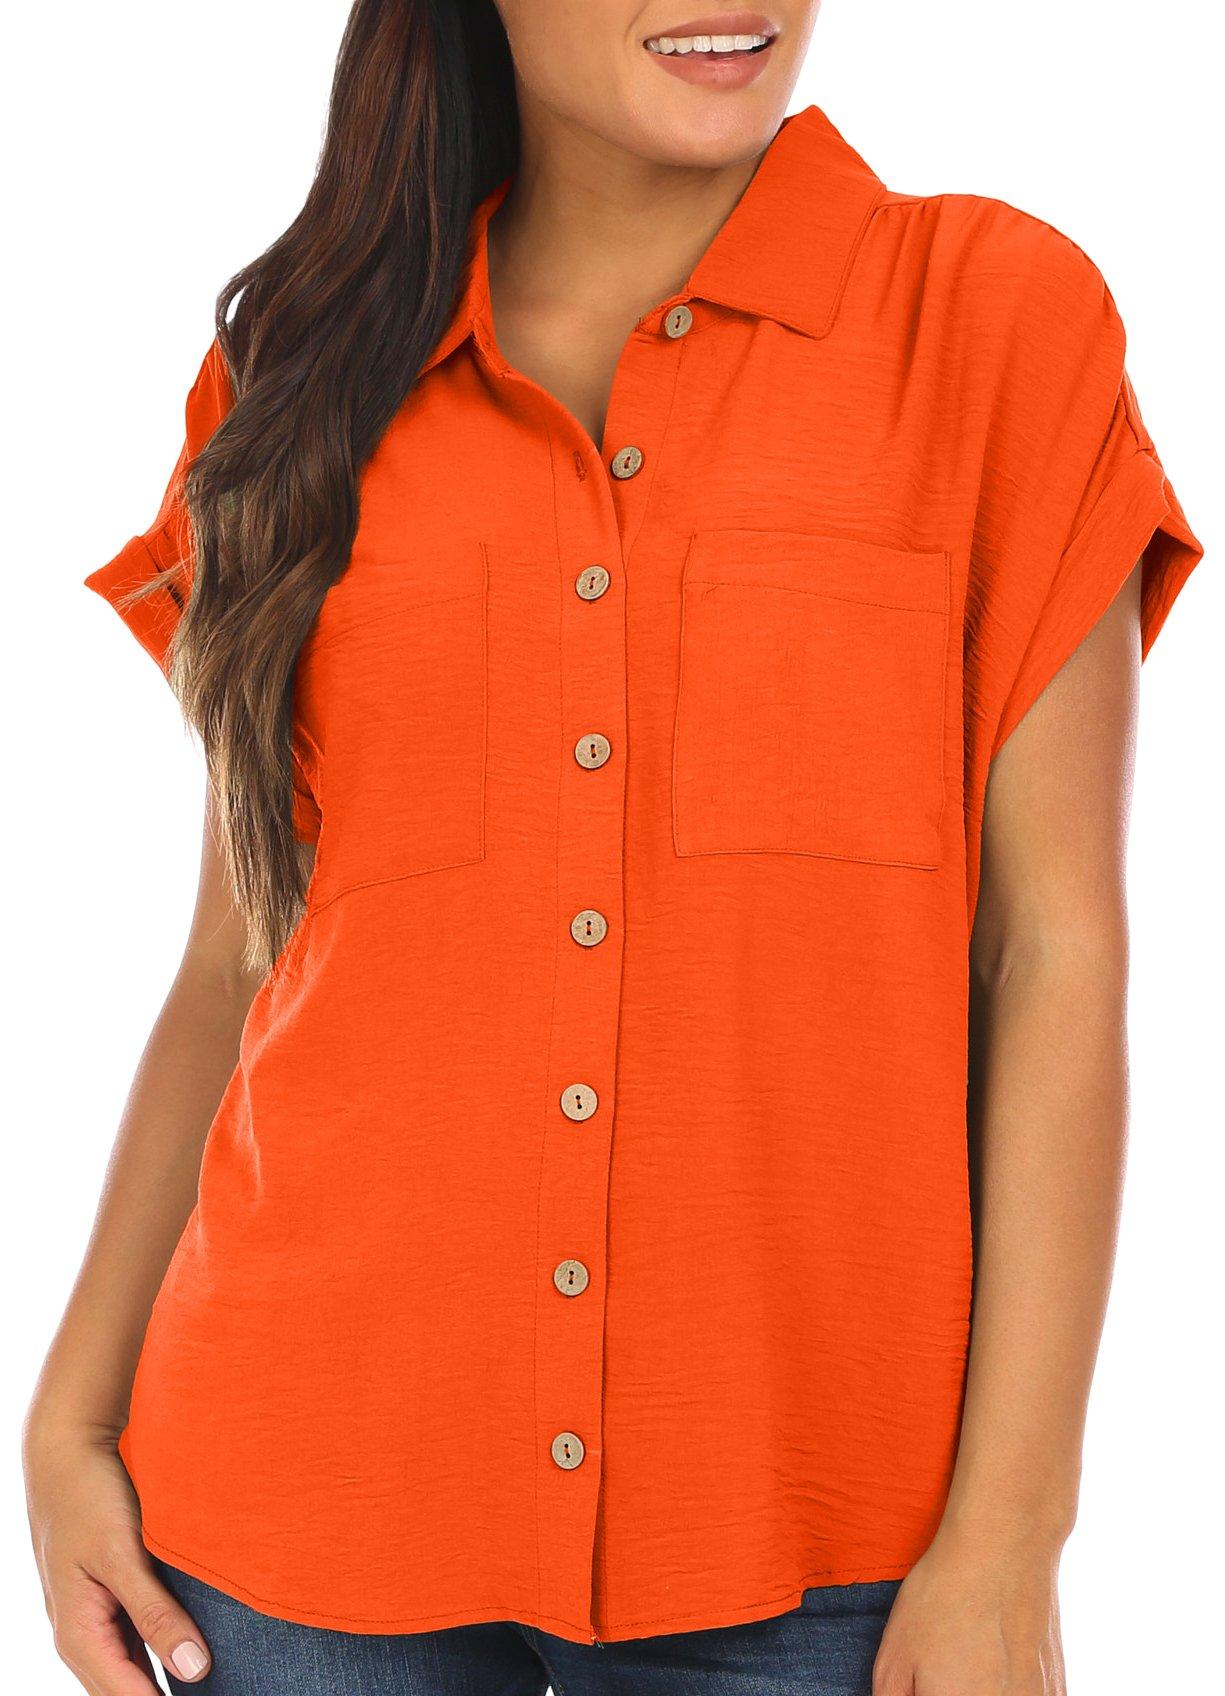 Juniors Solid Button Down Roll Cuff Short Sleeve Top